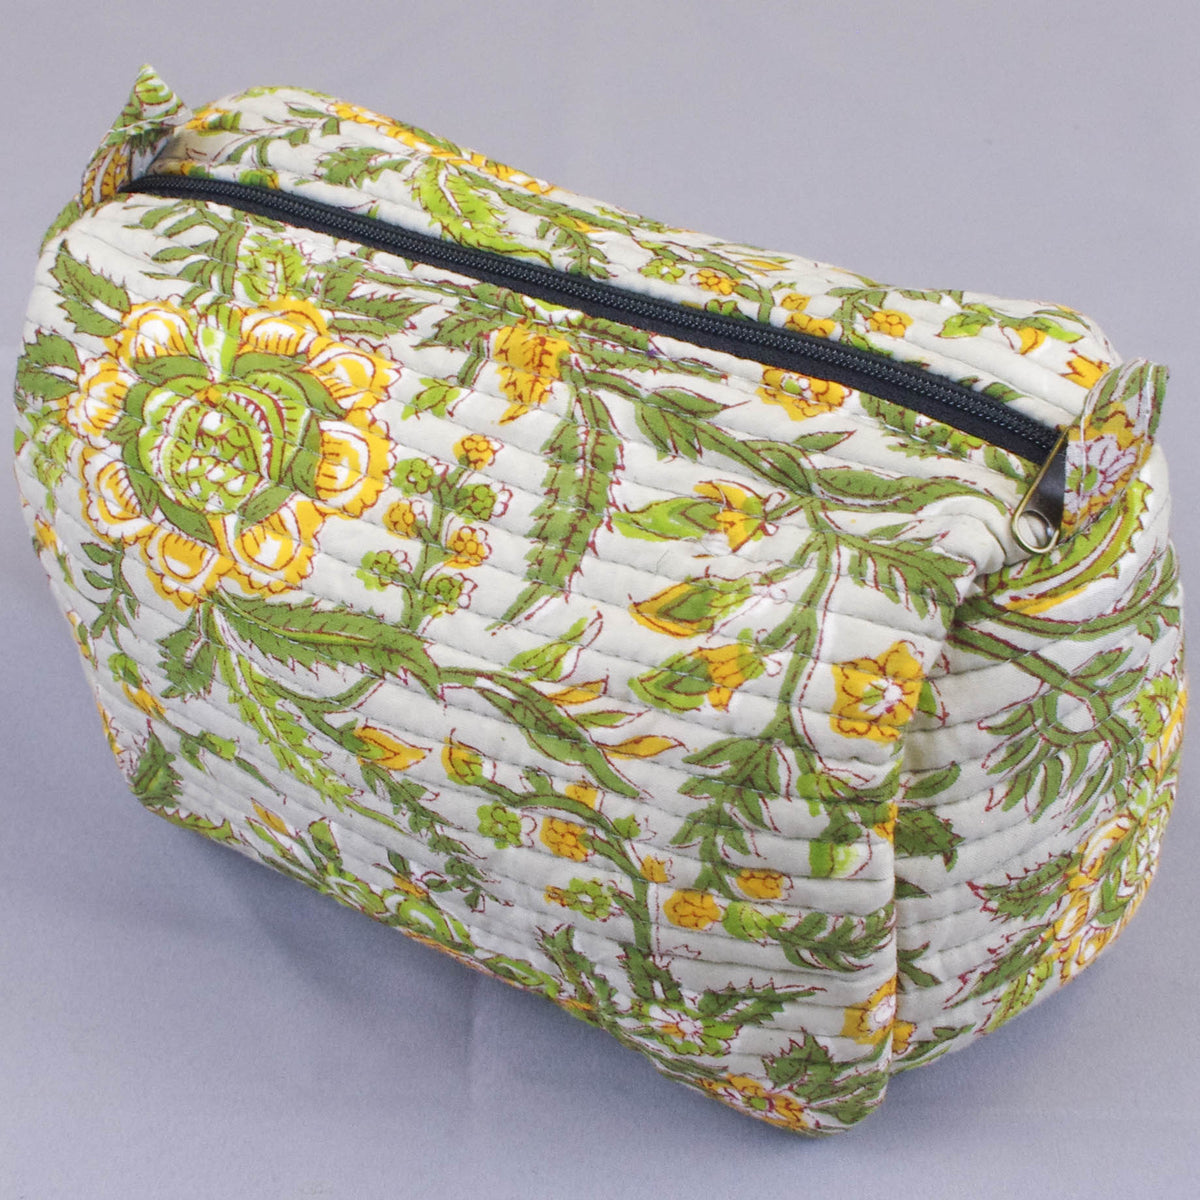 Block Print Quilted Toiletry Bag - Green Yellow Floral